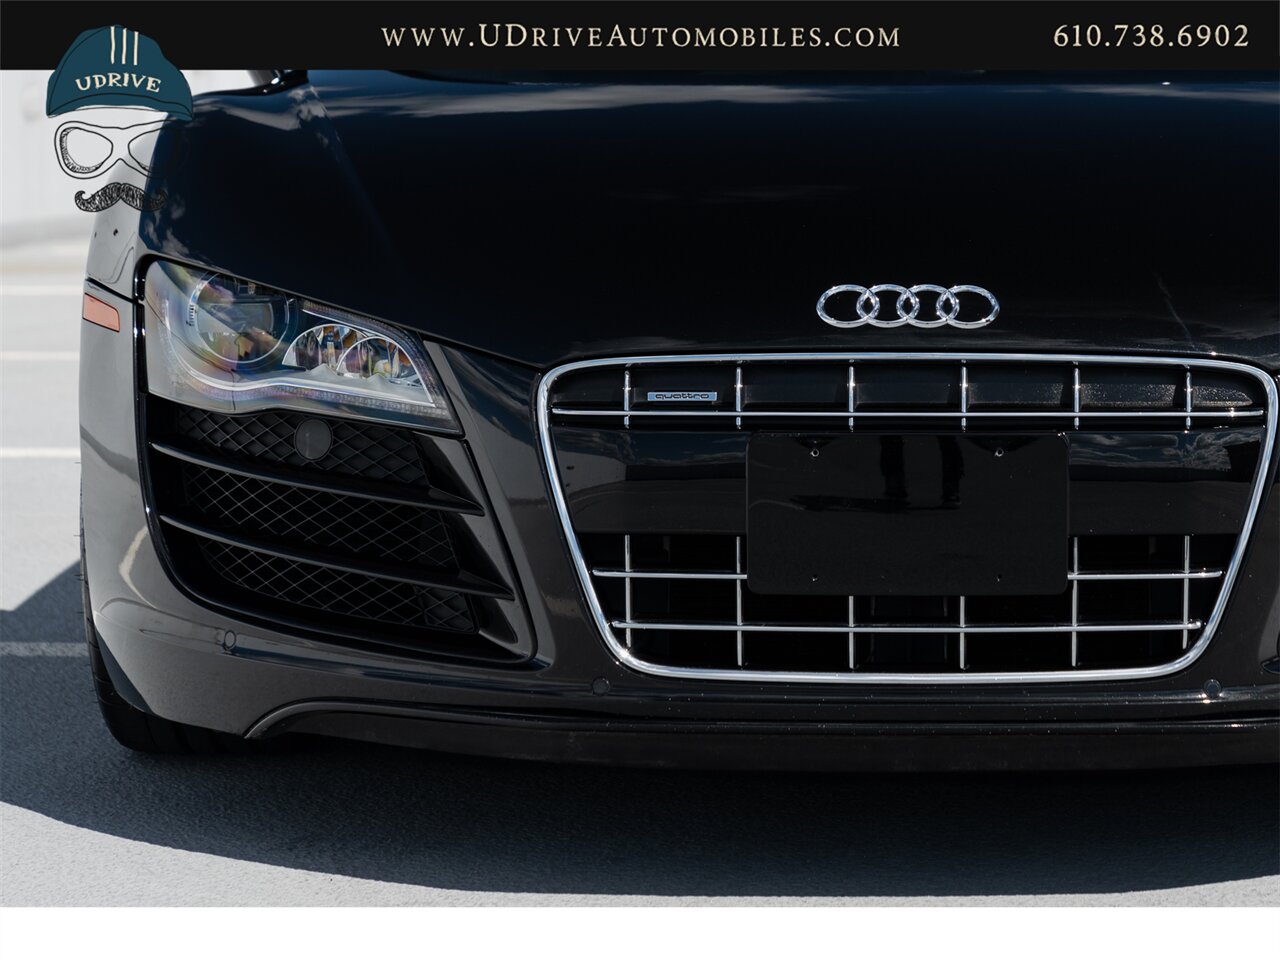 2011 Audi R8 5.2 Quattro  V10 6 Speed Manual - Photo 14 - West Chester, PA 19382